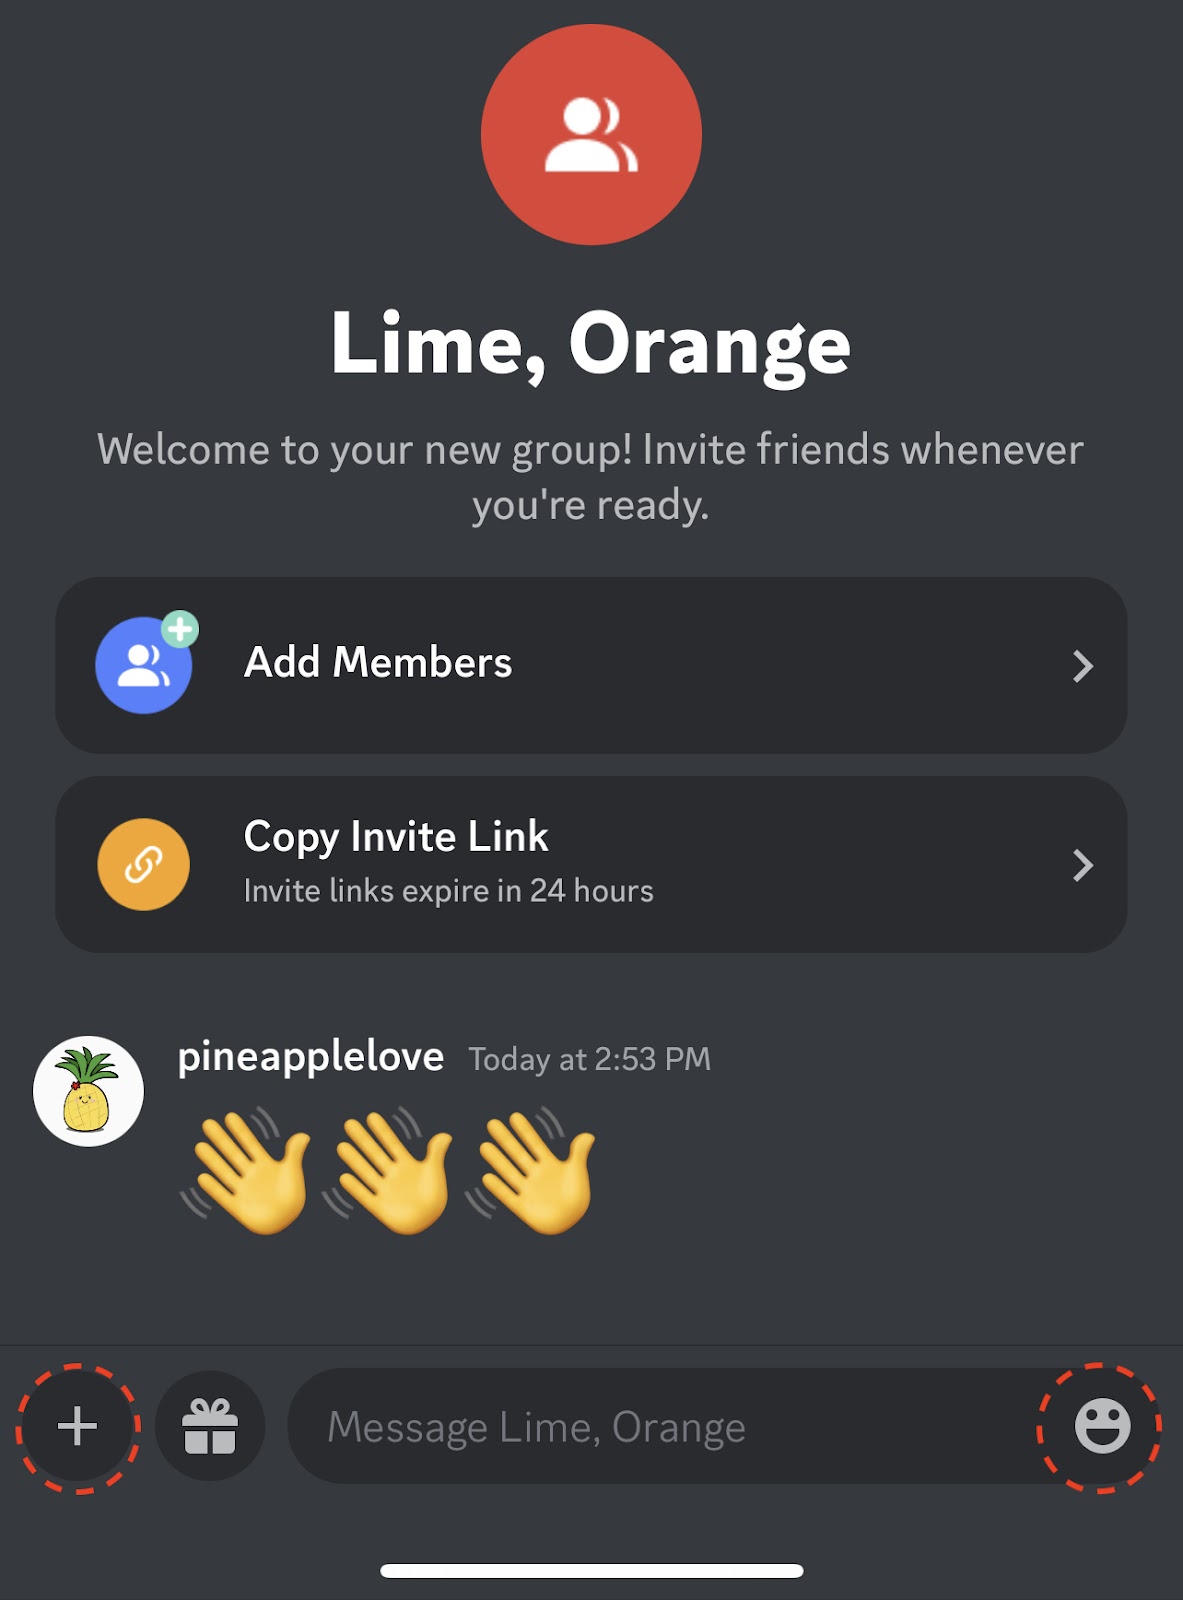 What Is Discord? a Guide to the Popular Group-Chatting App